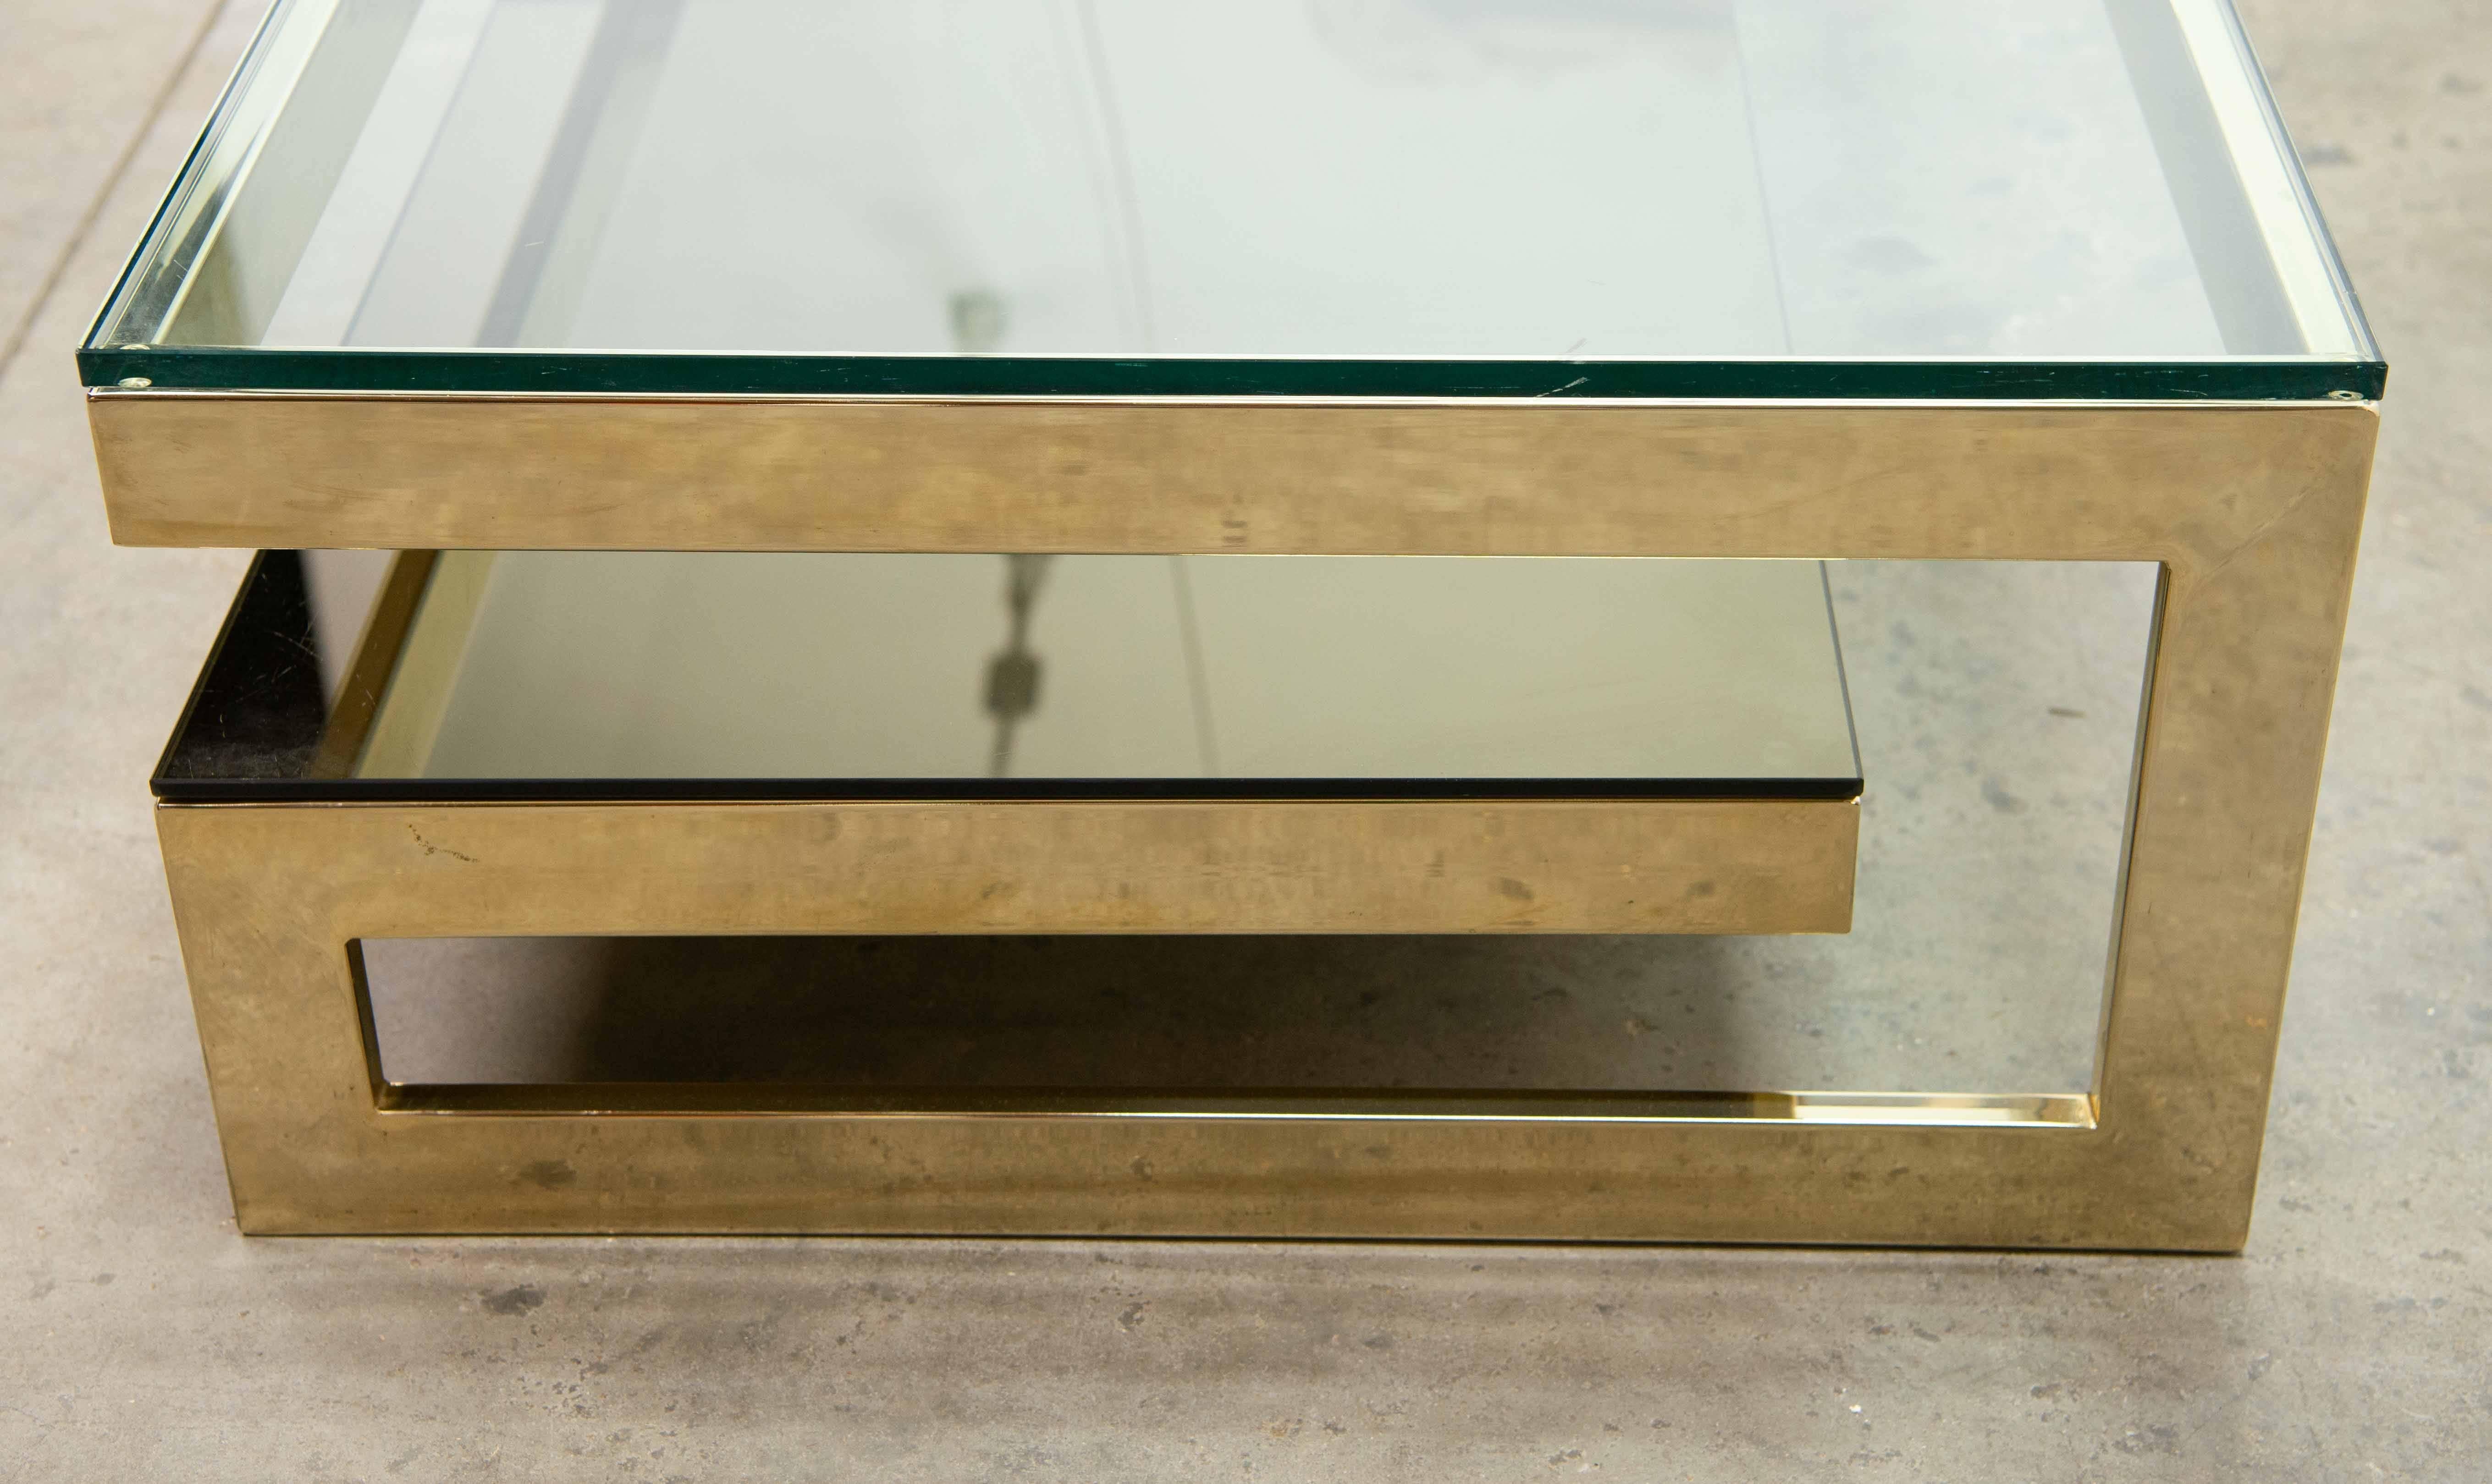 Late 20th Century Belgo Chrome Two-Tier Coffee Table, 23 Karat Gold Plating, Maison Janssen Style For Sale